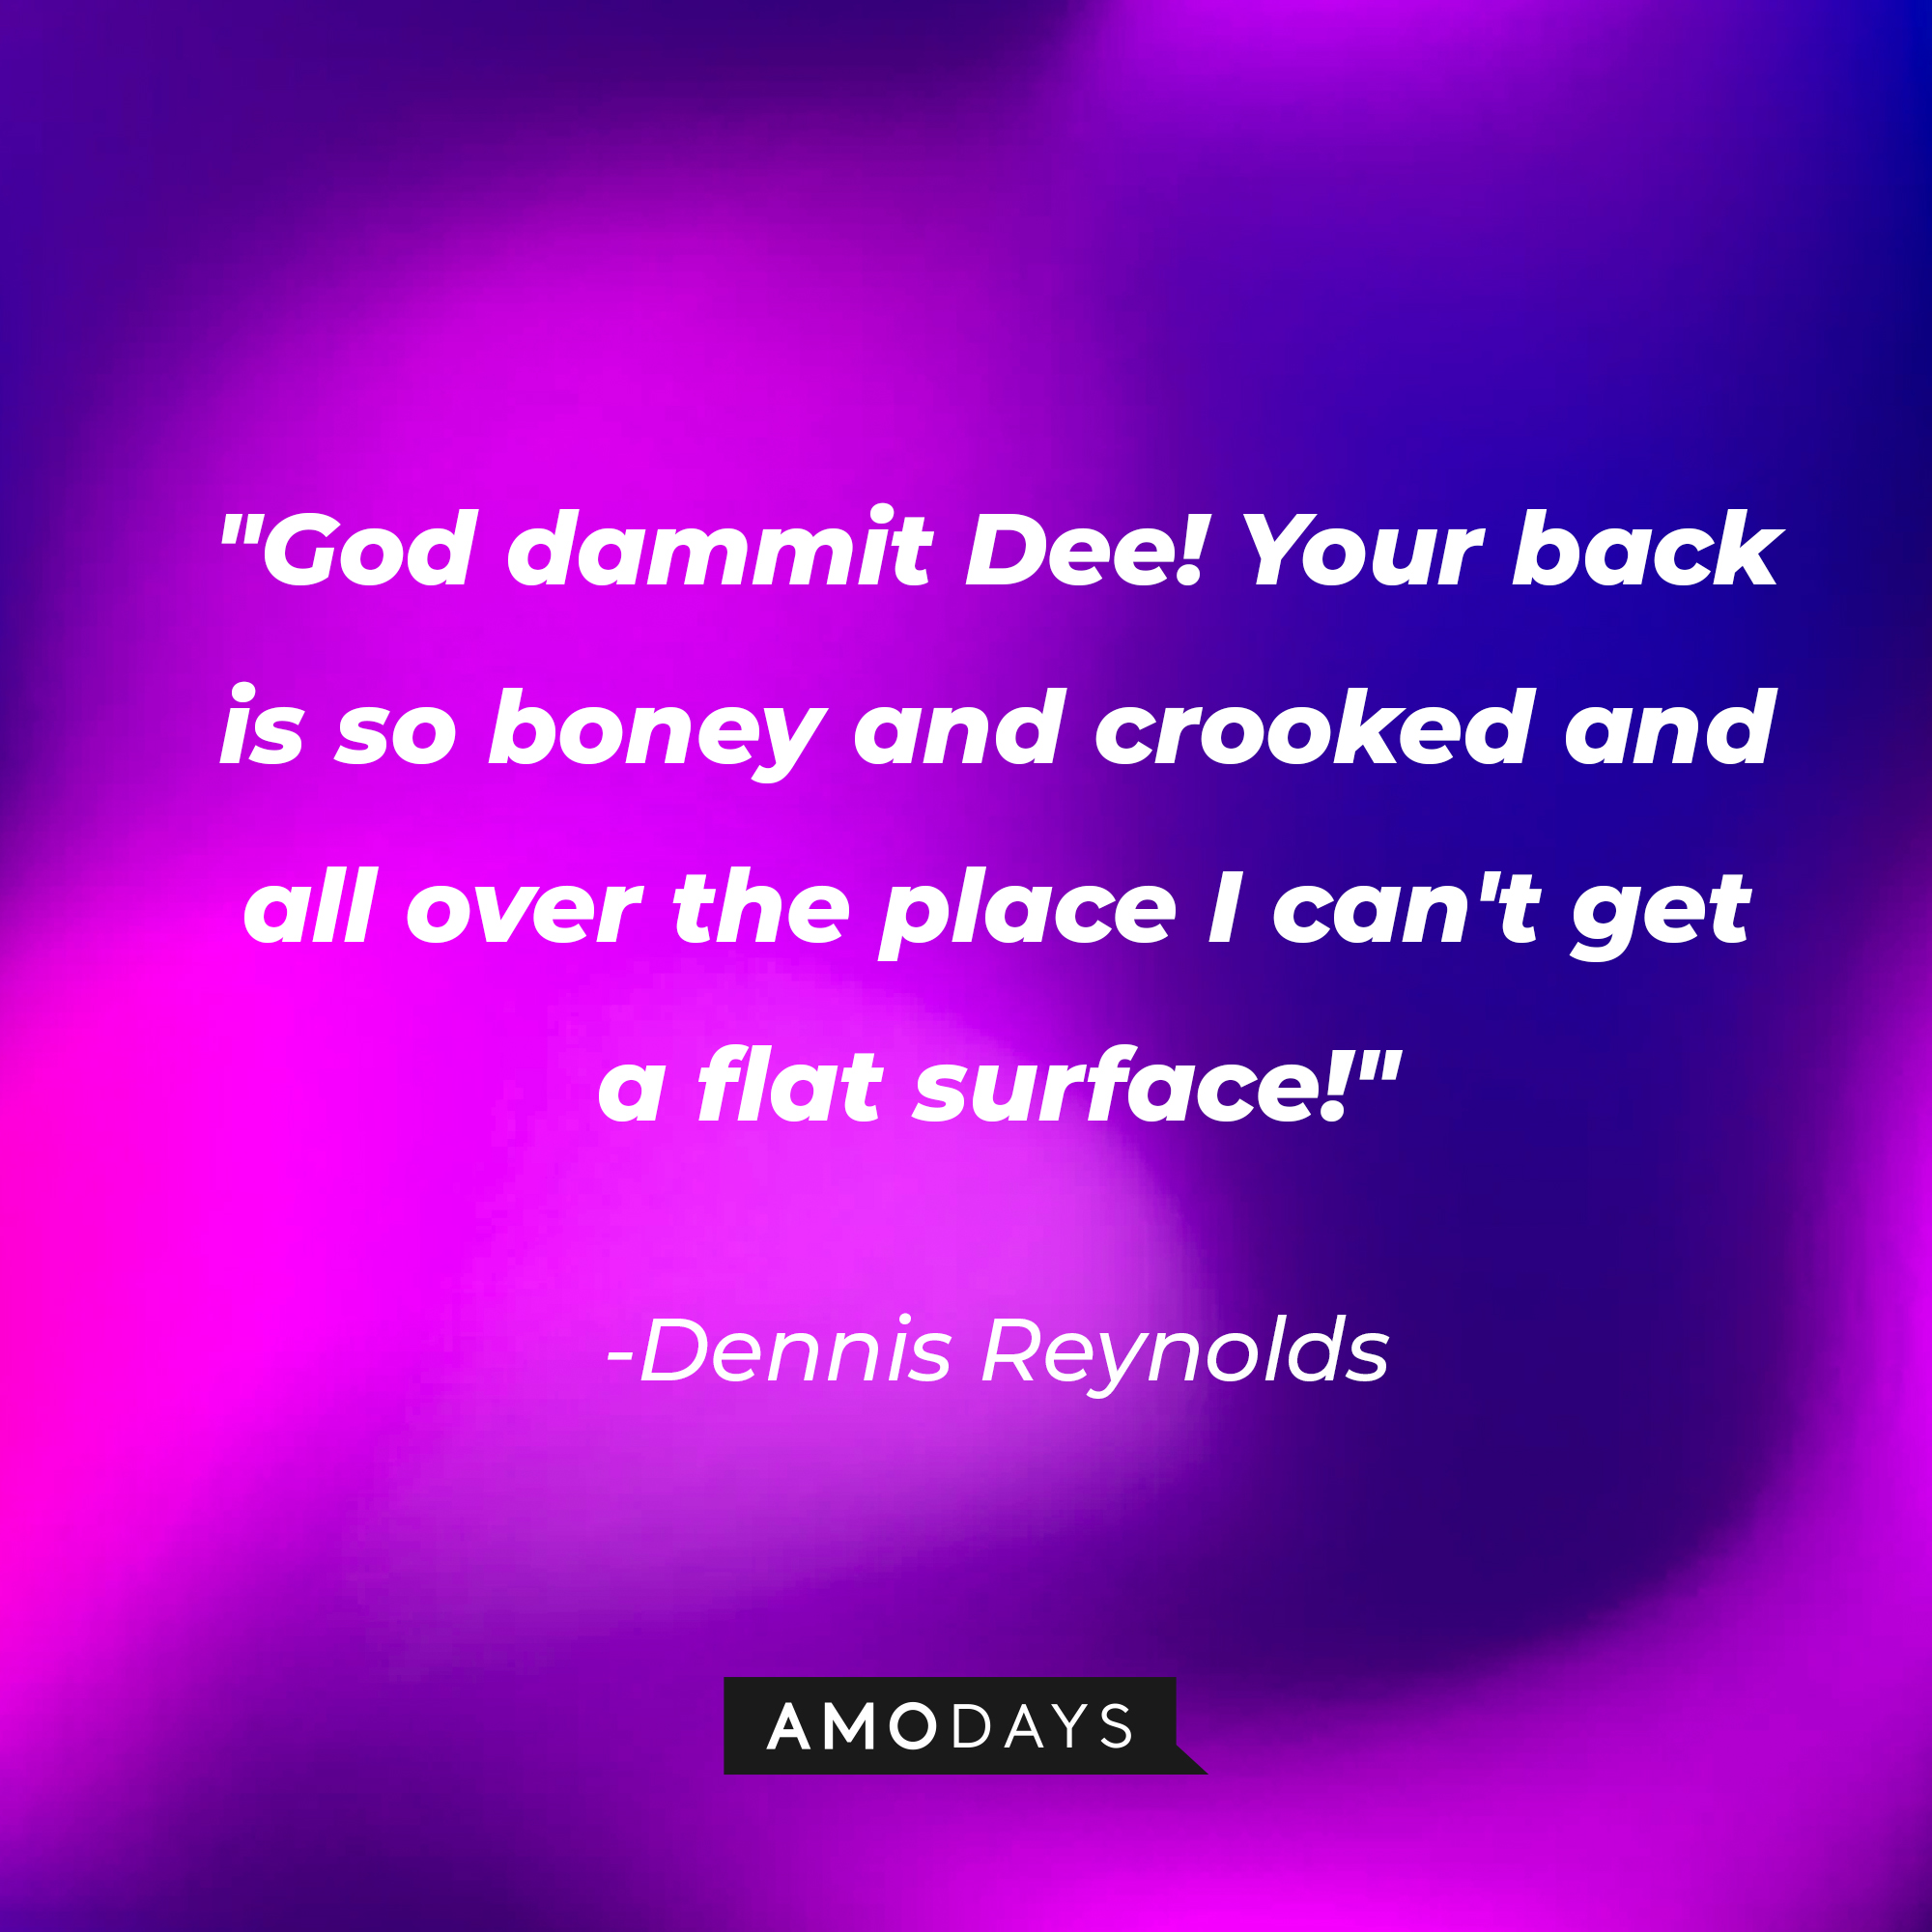 Dennis Reynolds’ quote:  “God dammit Dee! Your back is so boney and crooked and all over the place I can't get a flat surface!” | Source: AmoDays